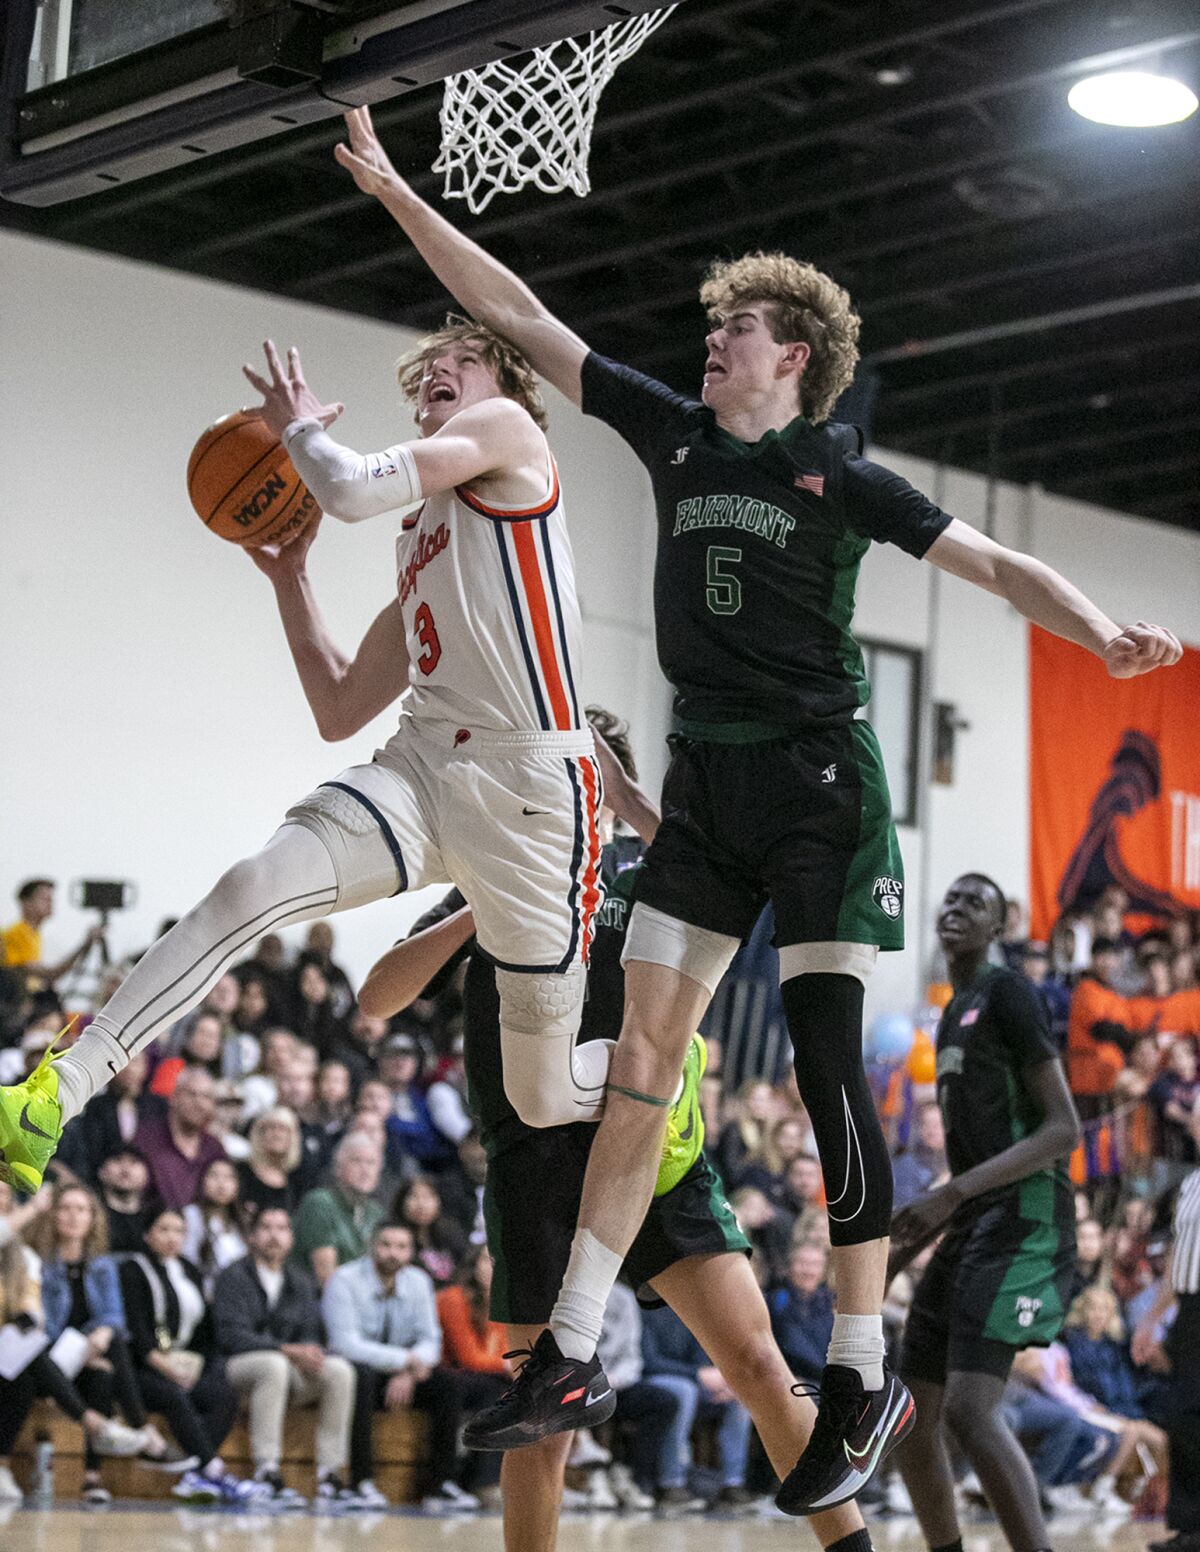 Pacifica Christian Orange County's Parker Strauss is shown going up for a shot against Fairmont Prep on Jan. 27.